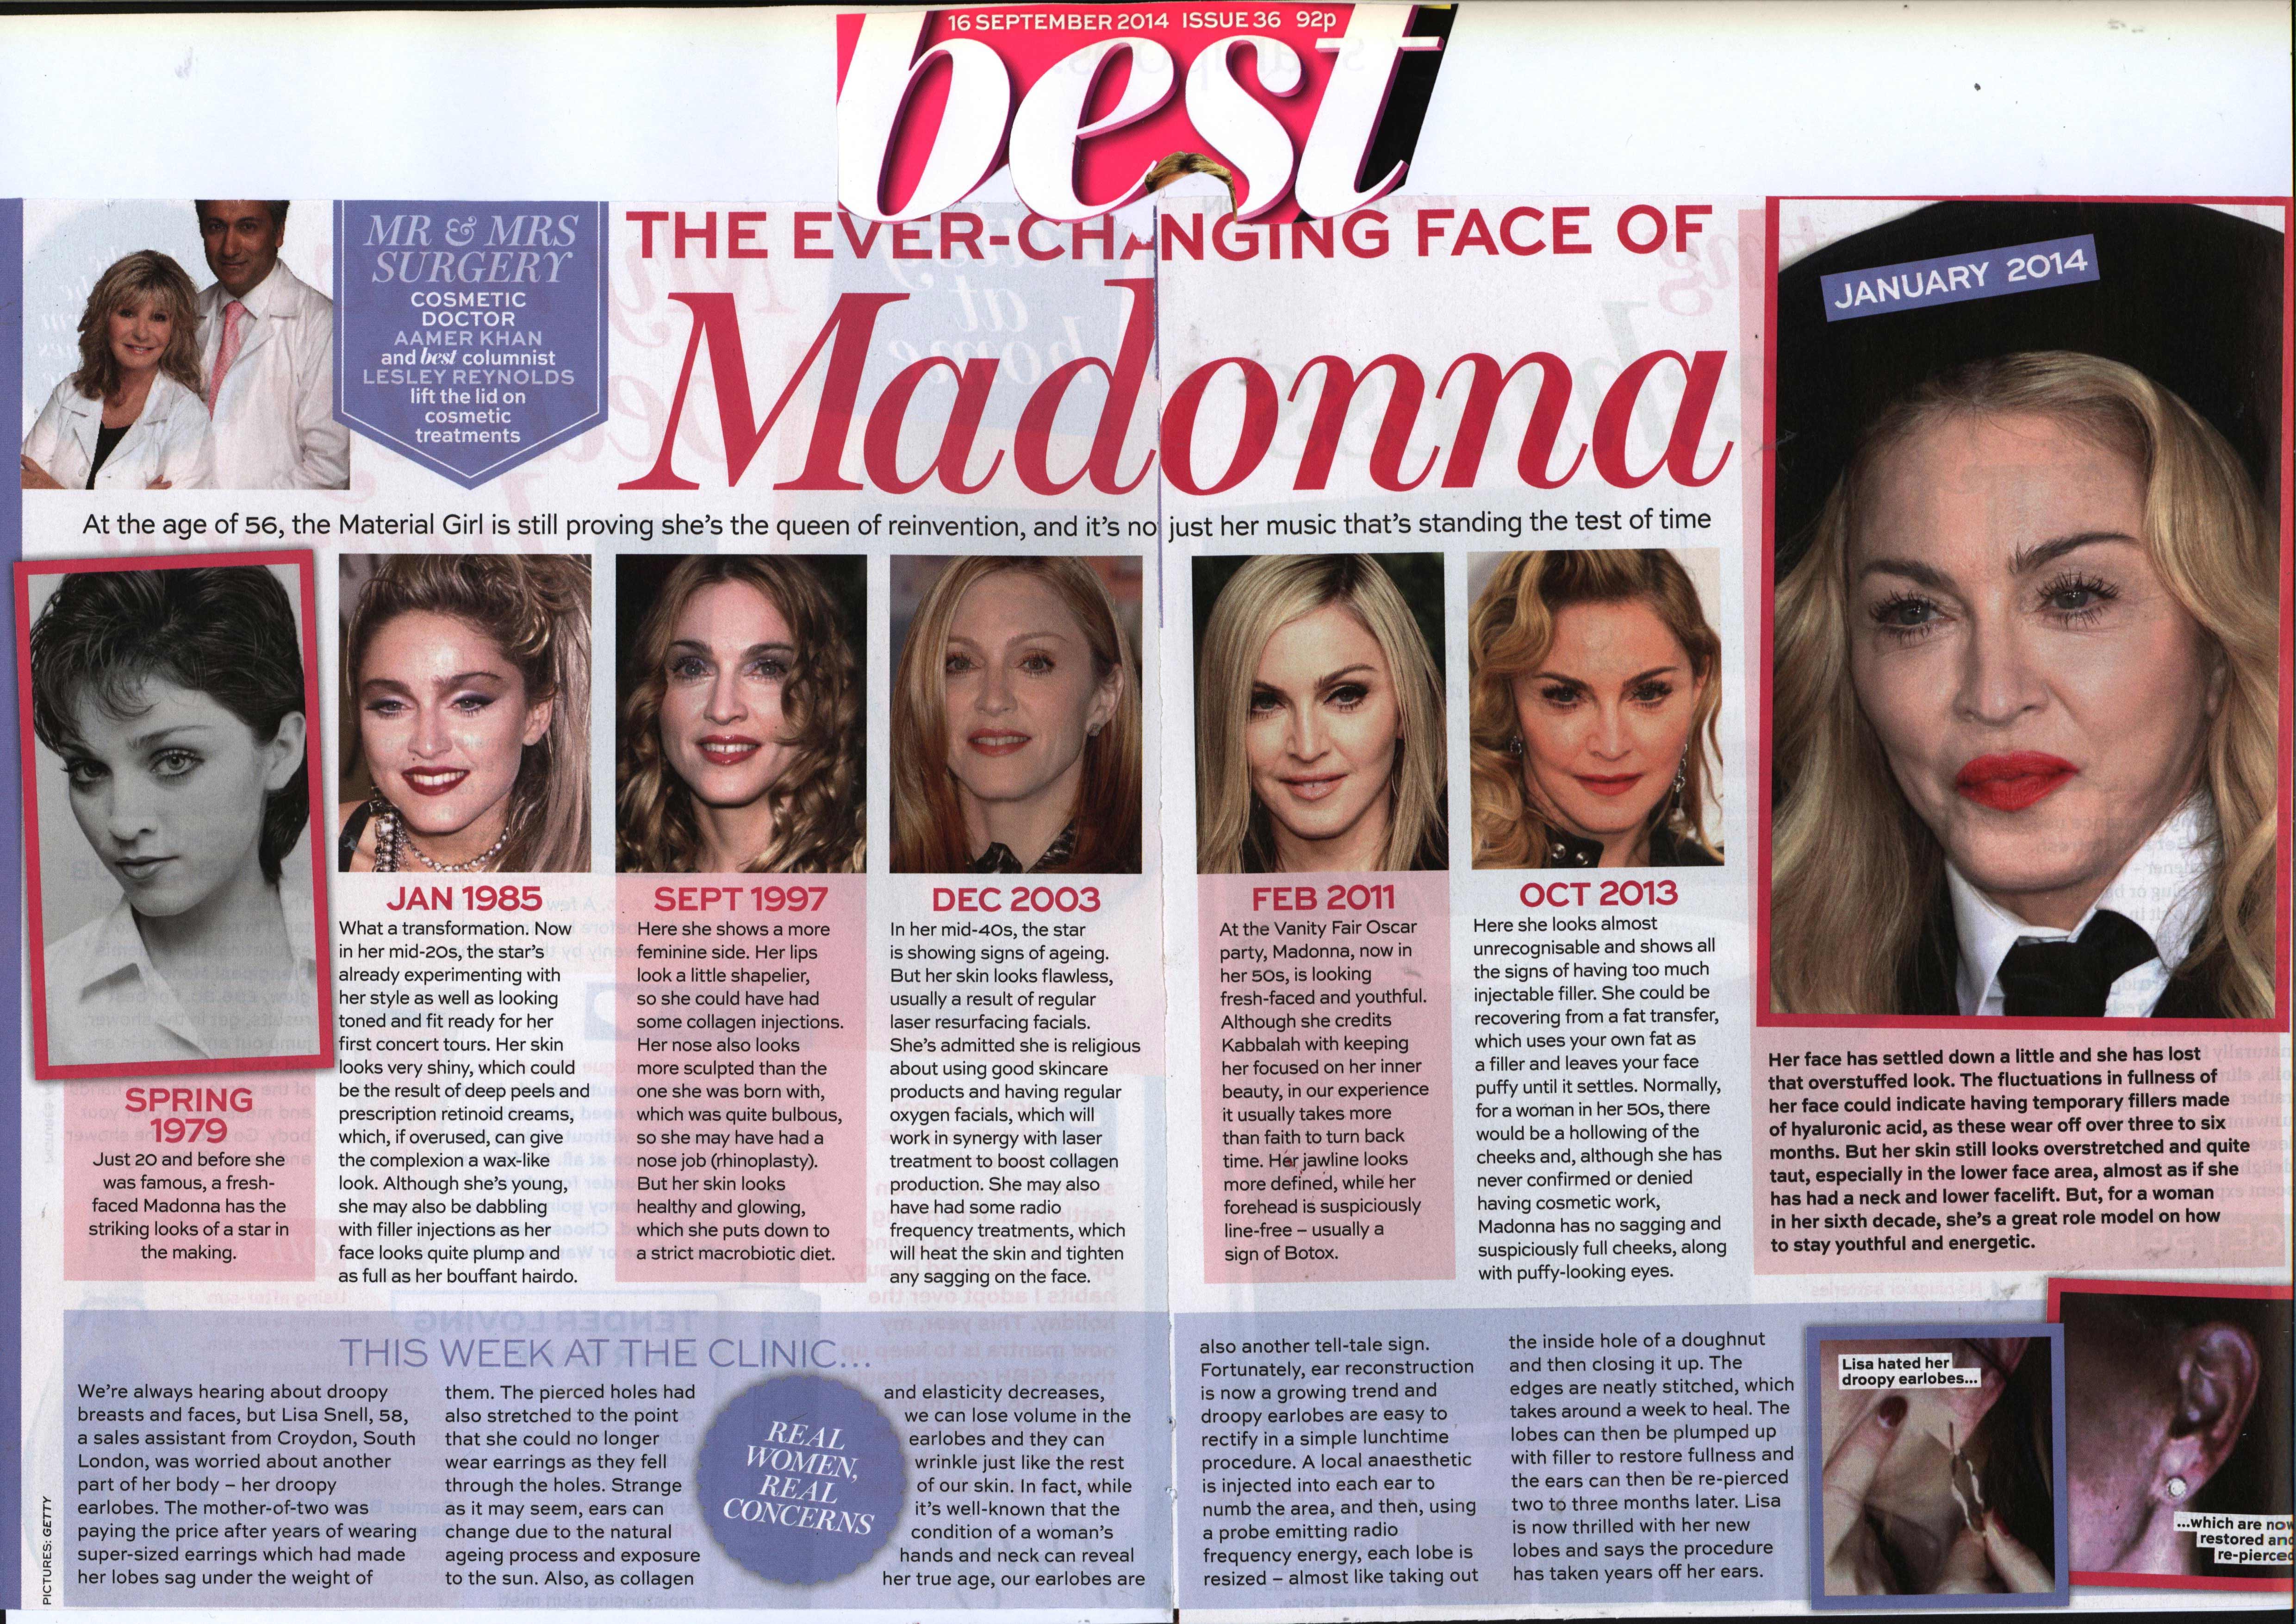 The changing face of Madonna. | Lesley Reynolds